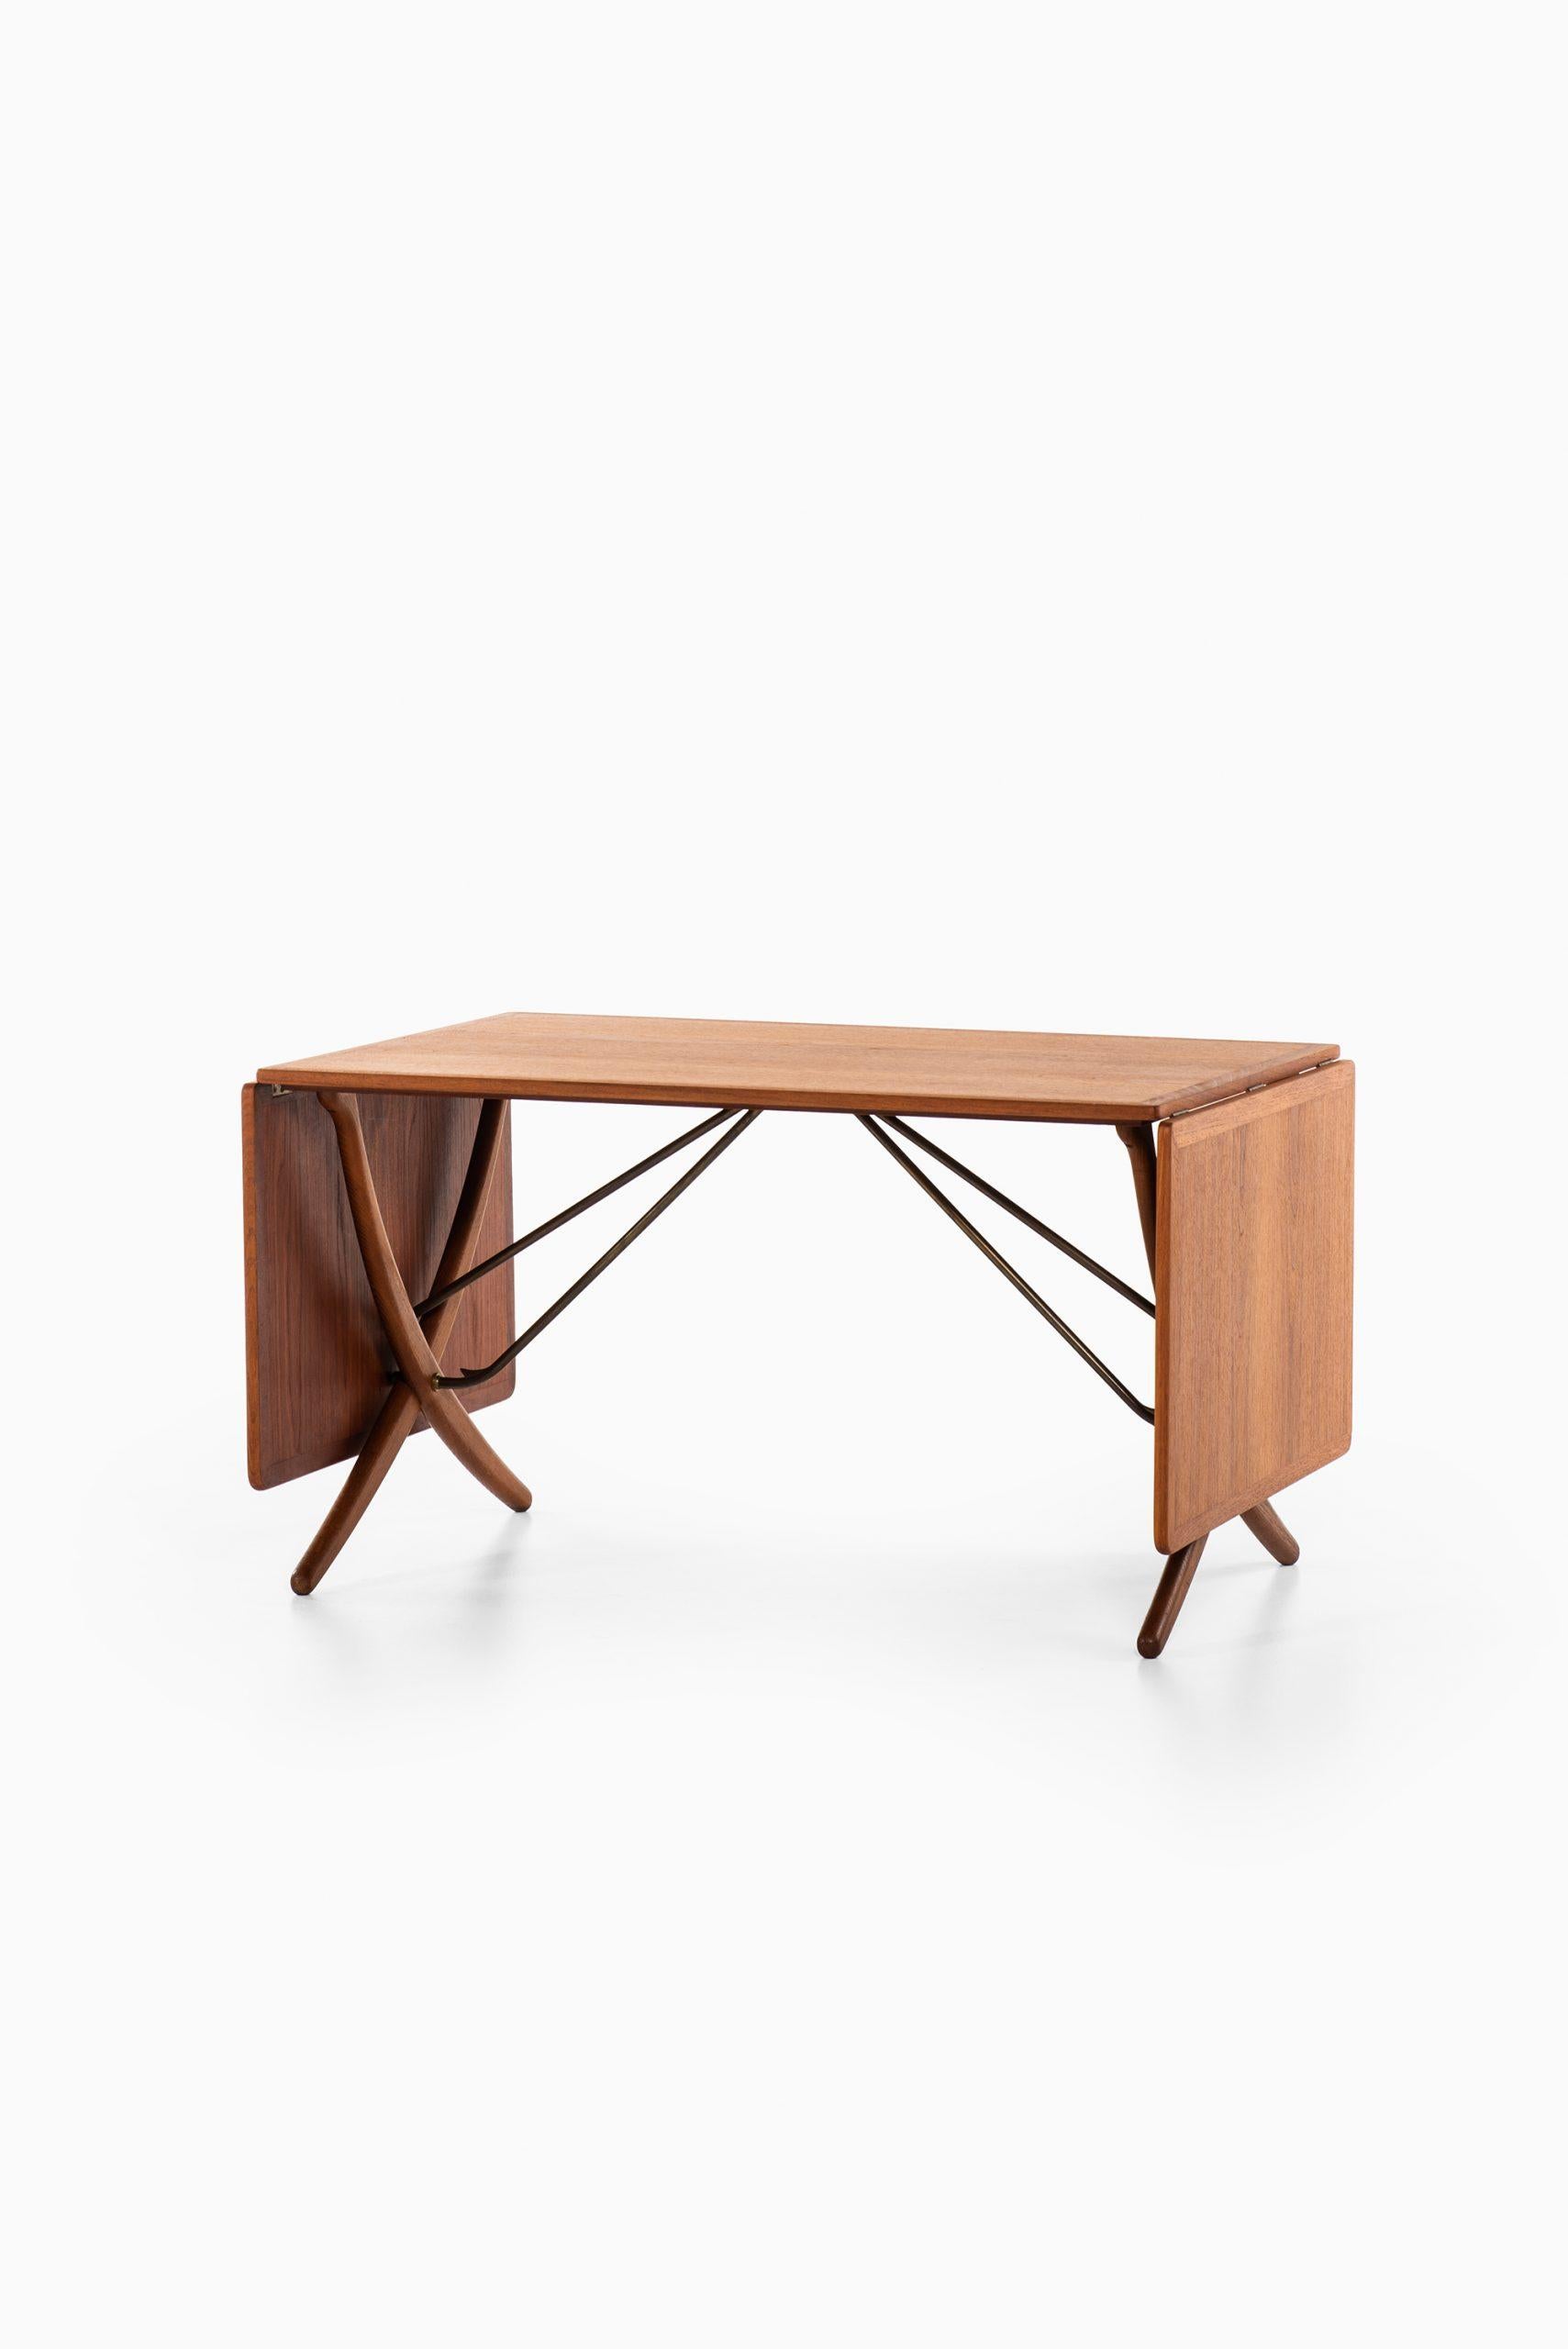 Rare dining table model AT-304 designed by Hans Wegner. Produced by Andreas Tuck in Denmark.
Measure: Width 132-238 cm.